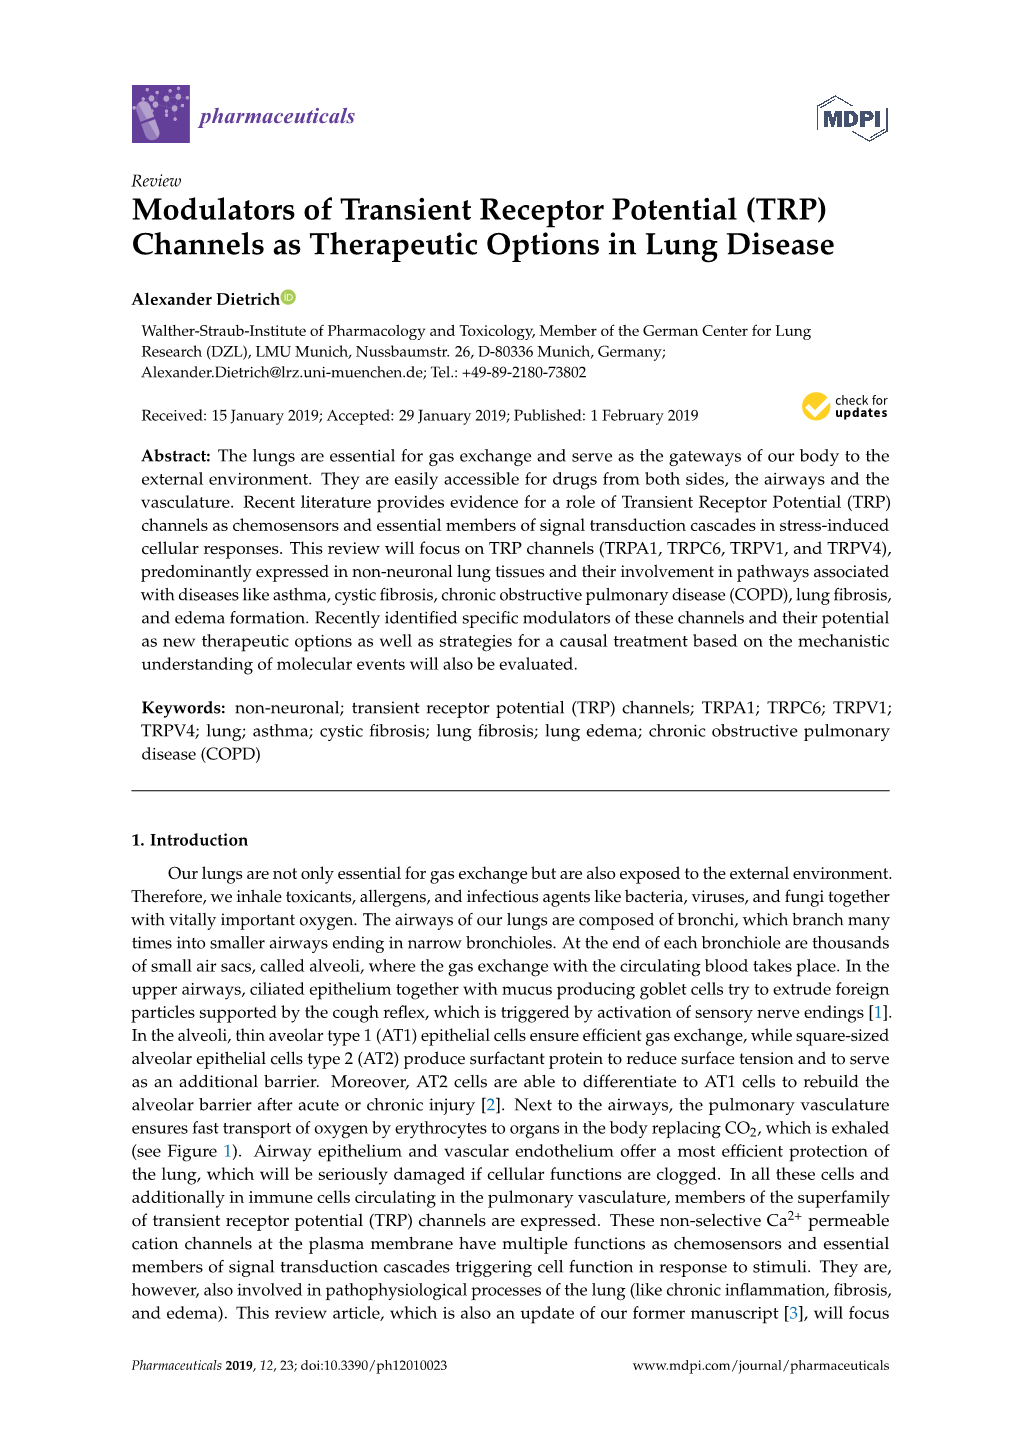 Modulators of Transient Receptor Potential (TRP) Channels As Therapeutic Options in Lung Disease